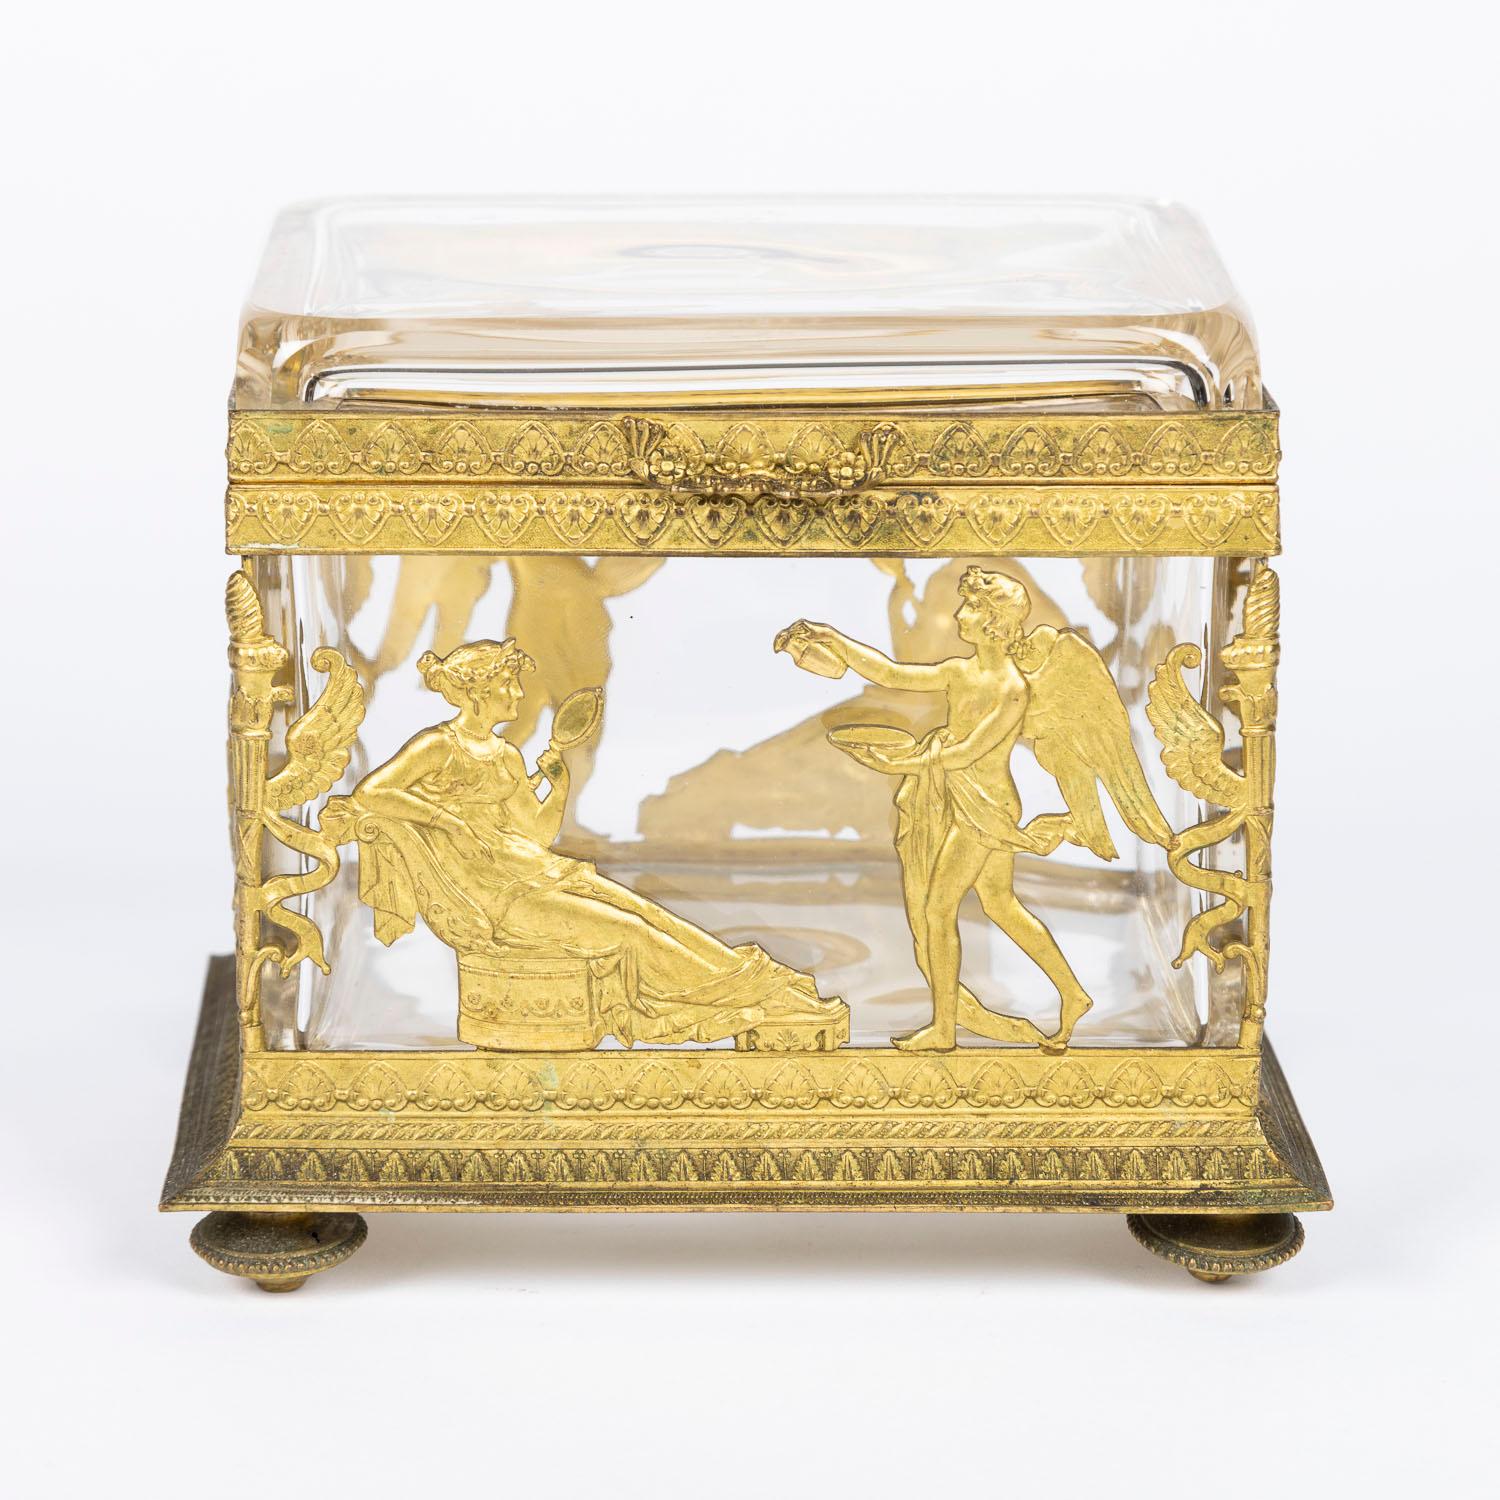 A French late 19th century Empire style crystal box with classical gilt bronze mounts.